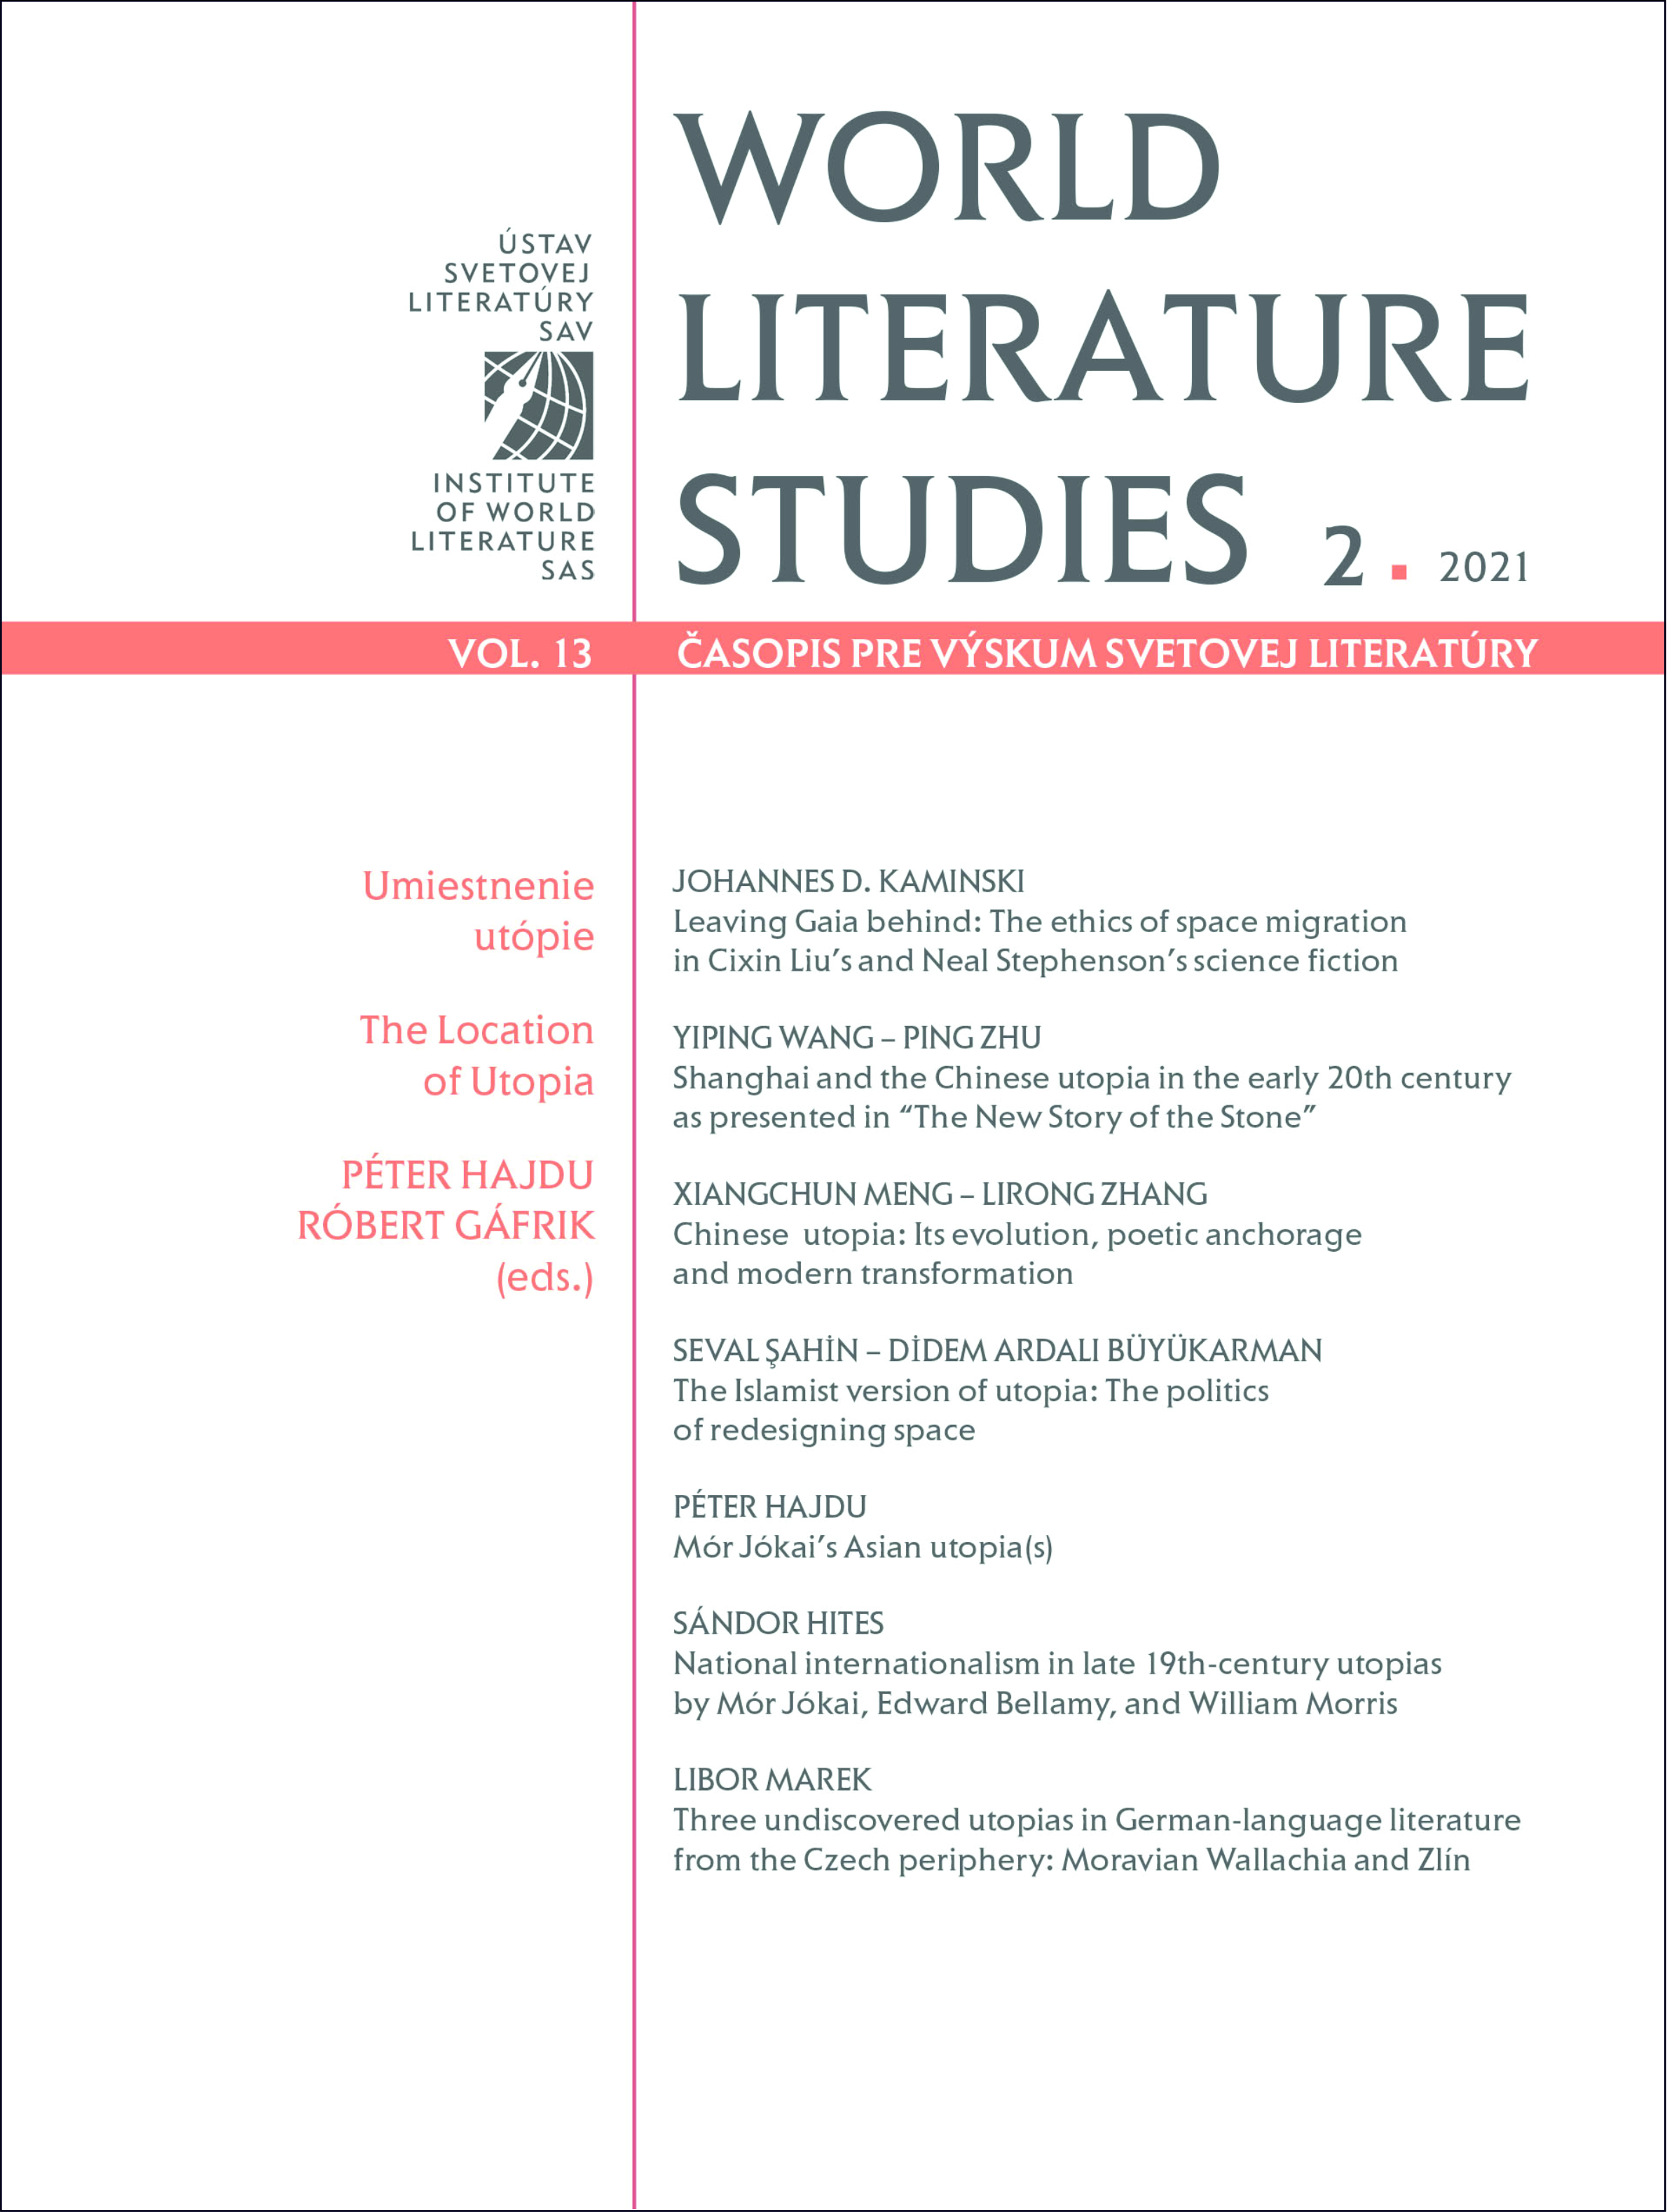 Ágnes Györke – Imola Bülgözdi (eds.): Geographies of  affect in Contemporary Literature and Visual Culture: Central Europe and the West Cover Image